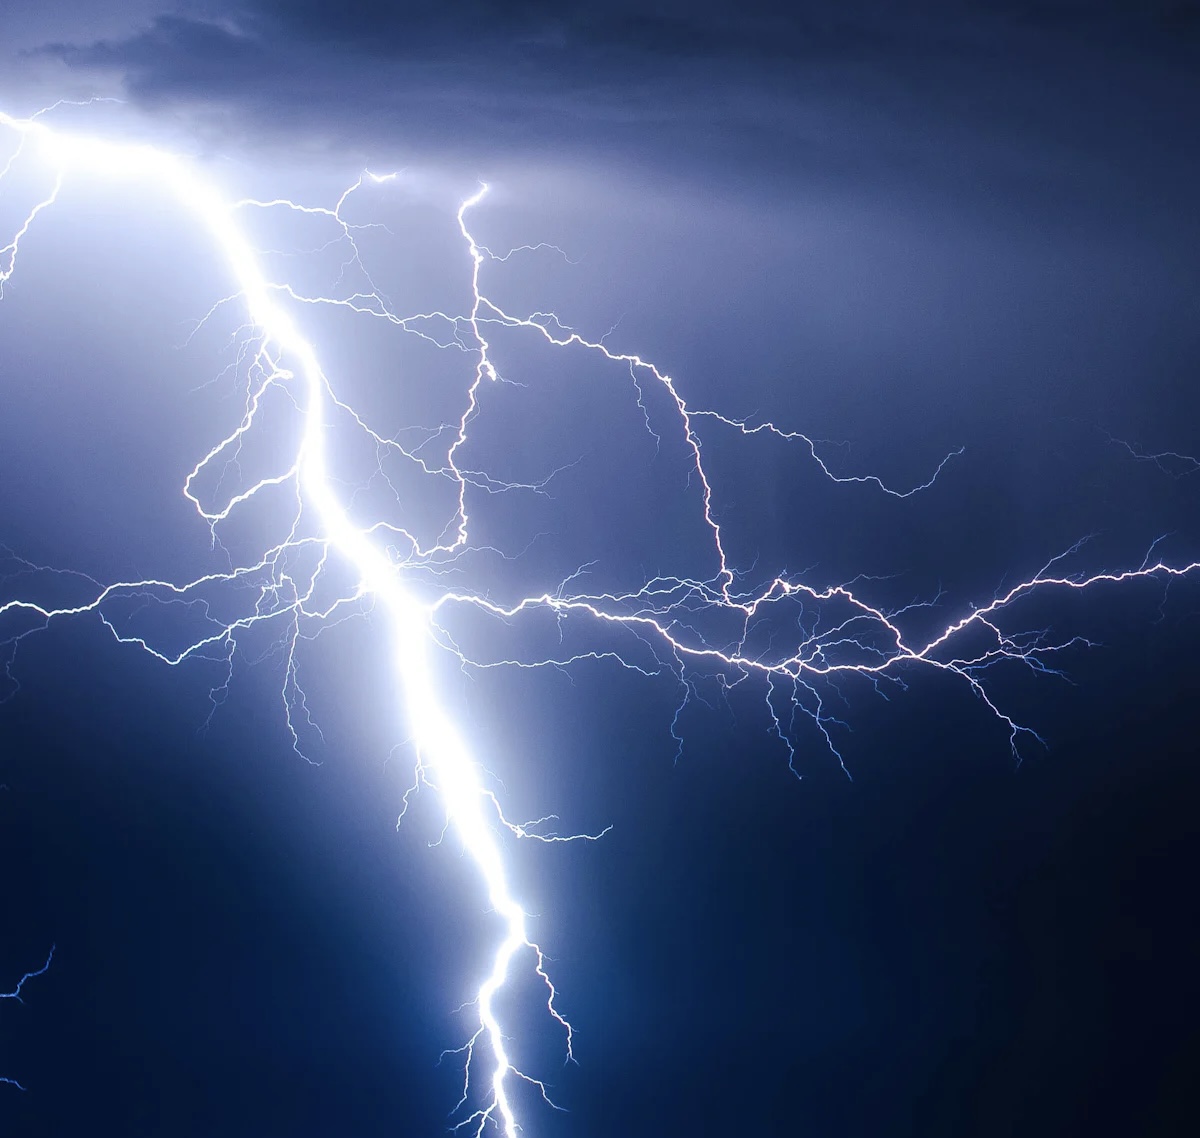 WEATHER WARNING | Torrential rain, frequent lightning and thunder possible across parts of Herefordshire later this evening and overnight 